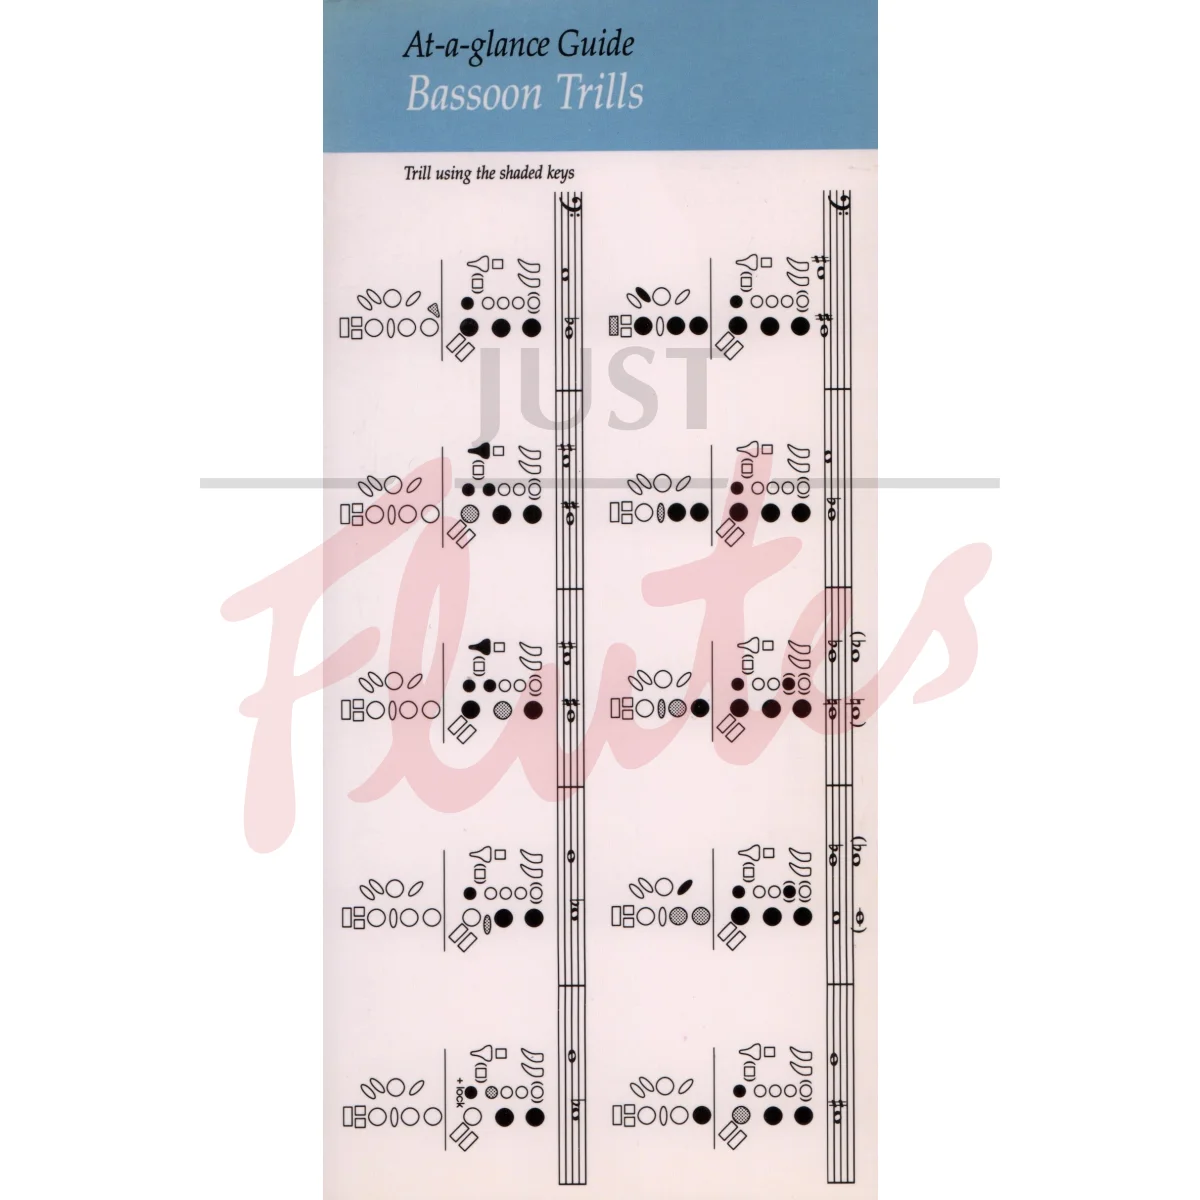 At-a-glance Guide: Bassoon Trills